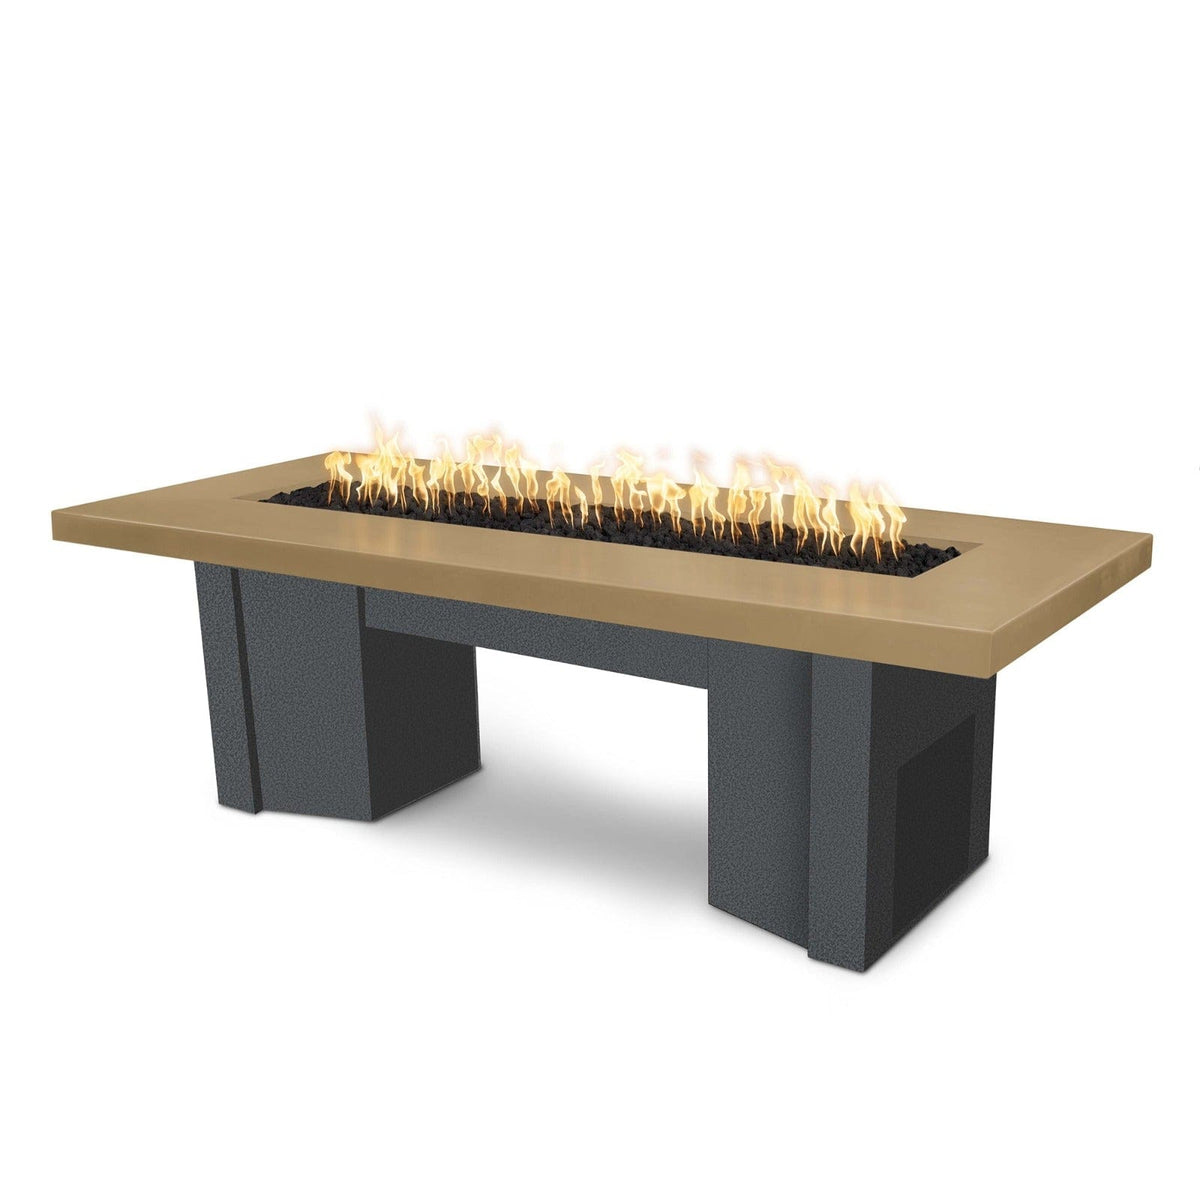 The Outdoor Plus Fire Features Brown (-BRN) / Silver Vein Powder Coated Steel (-SLV) The Outdoor Plus 60&quot; Alameda Fire Table Smooth Concrete in Natural Gas - 110V Plug &amp; Play Electronic Ignition / OPT-ALMGFRC60EKIT-NG